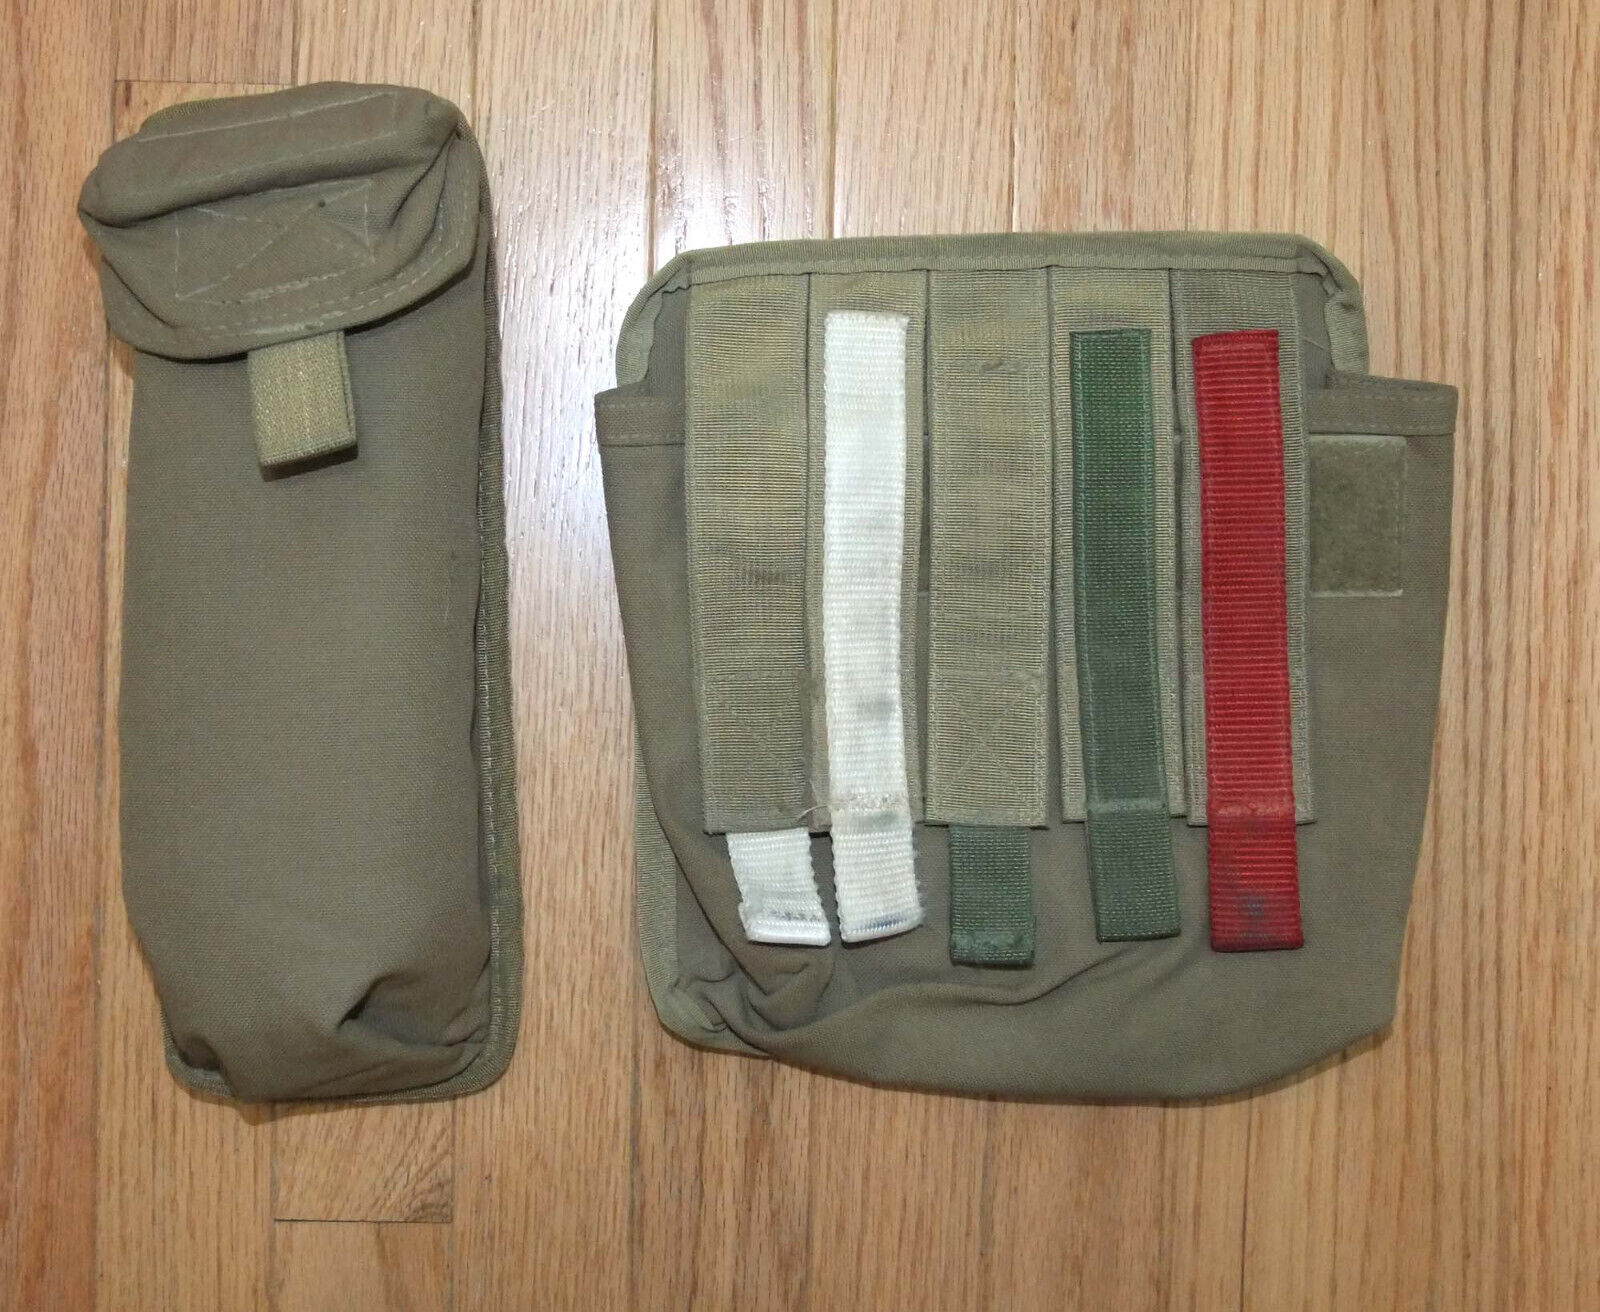 USMC Laser Dazzler Pouch and Multi-flare Vehicle Pouch Set